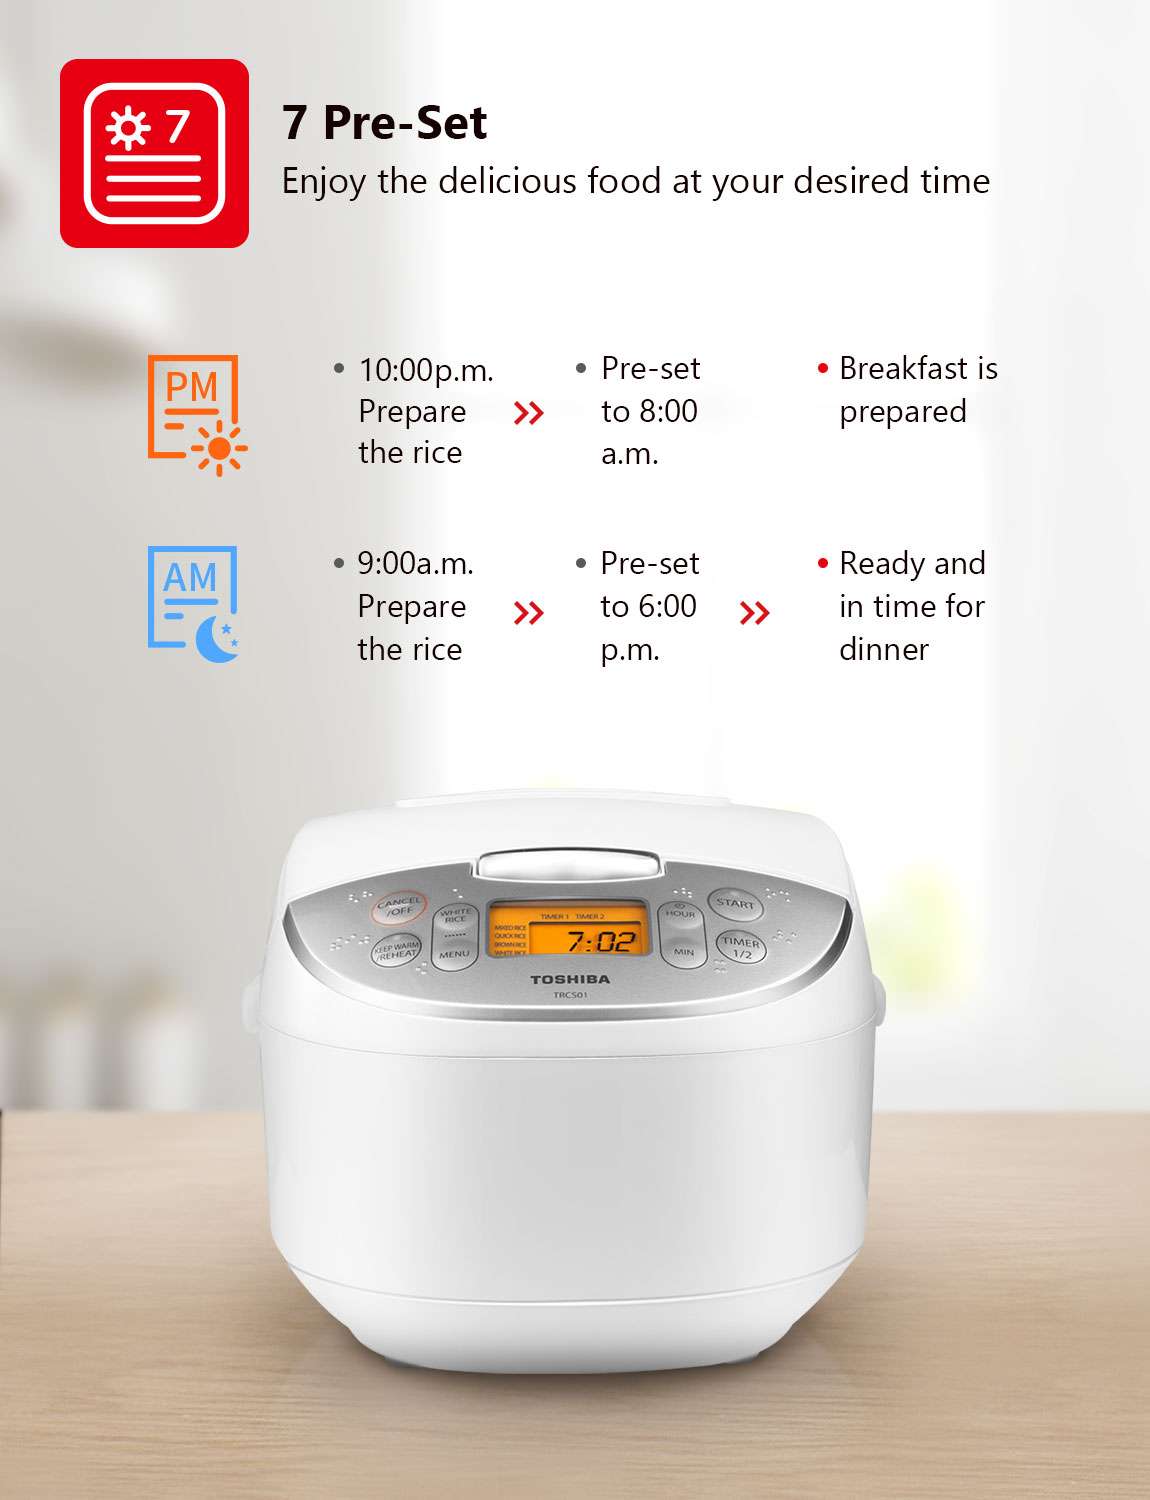 Toshiba Low Carb Rice Cooker